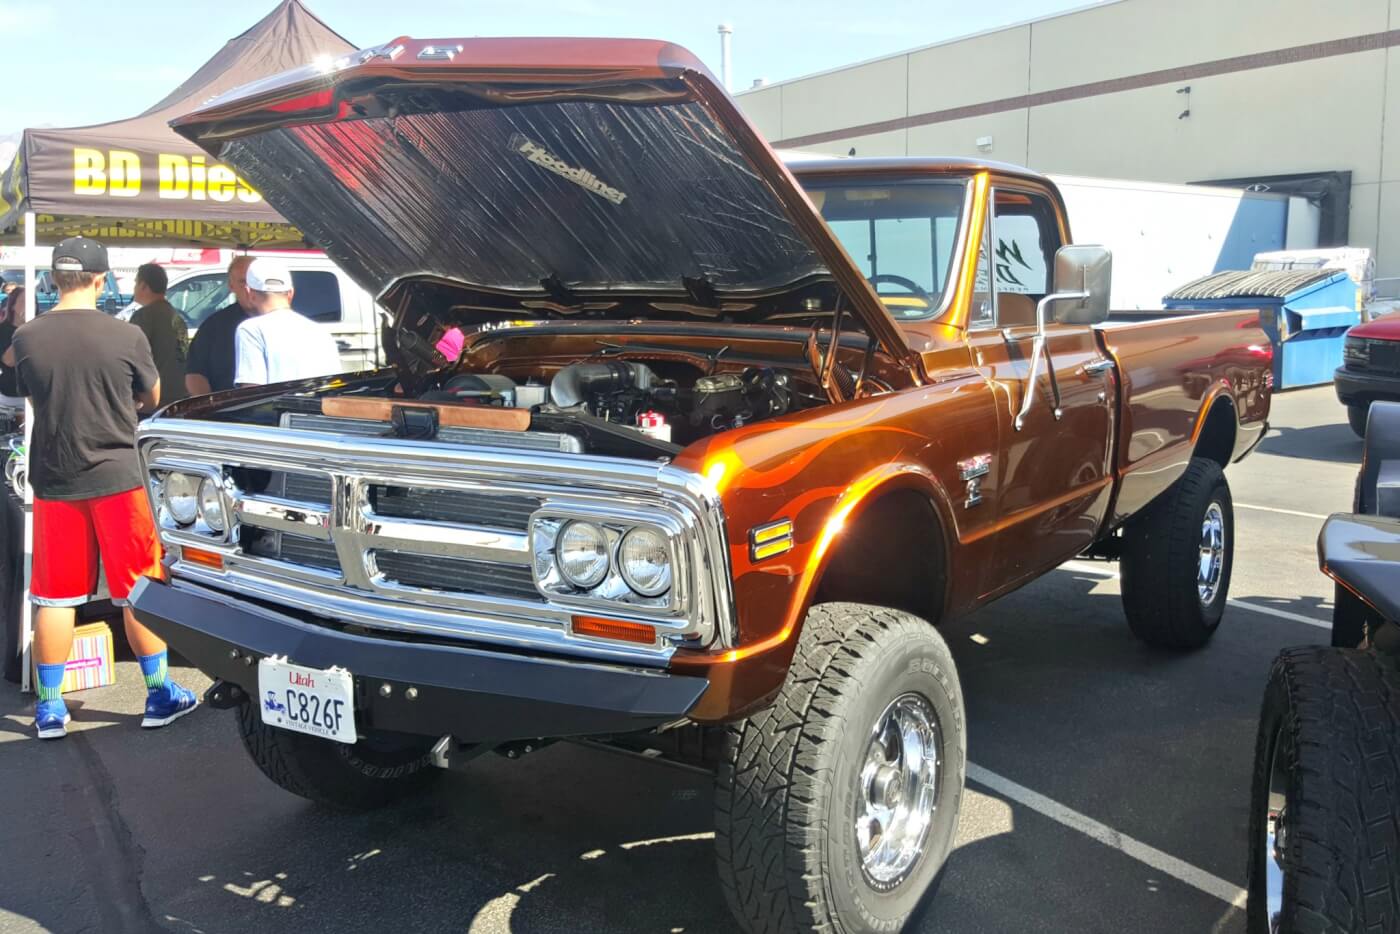 Out on display along the row of vendors was this immaculately restored early ‘70s Chevy truck that has been updated with a 12V 5.9L Cummins. The custom paint, interior and attention to detail are second to none.